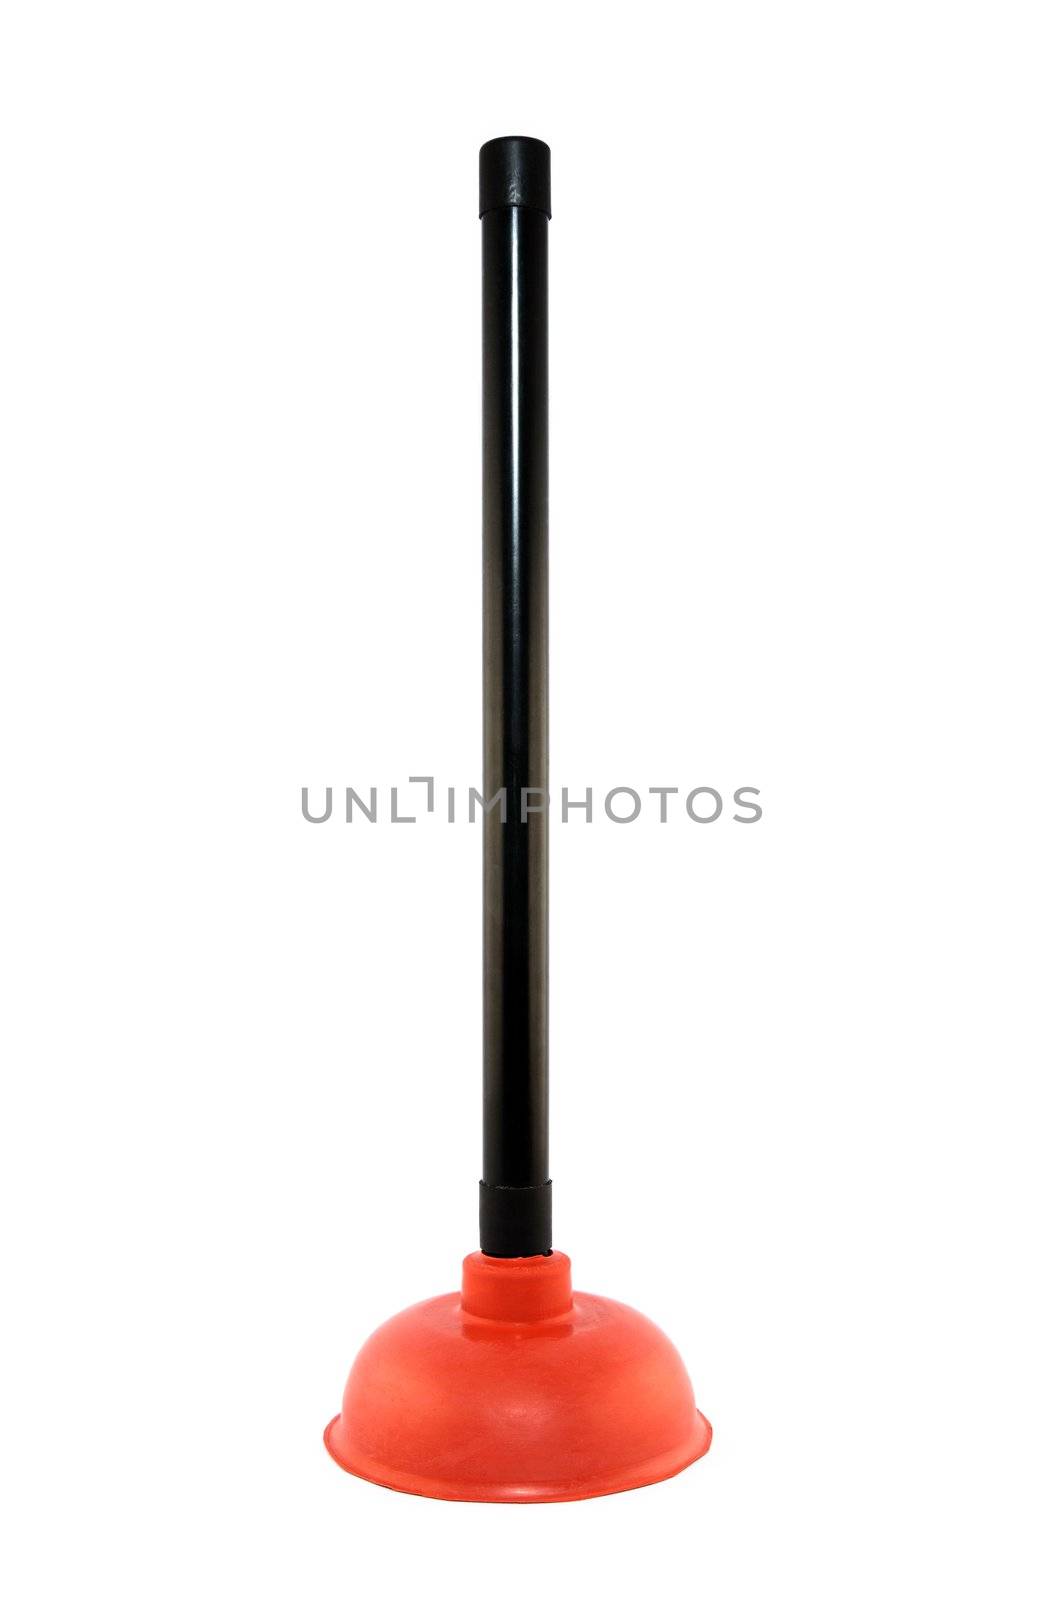 New red plunger, isolated on white background.